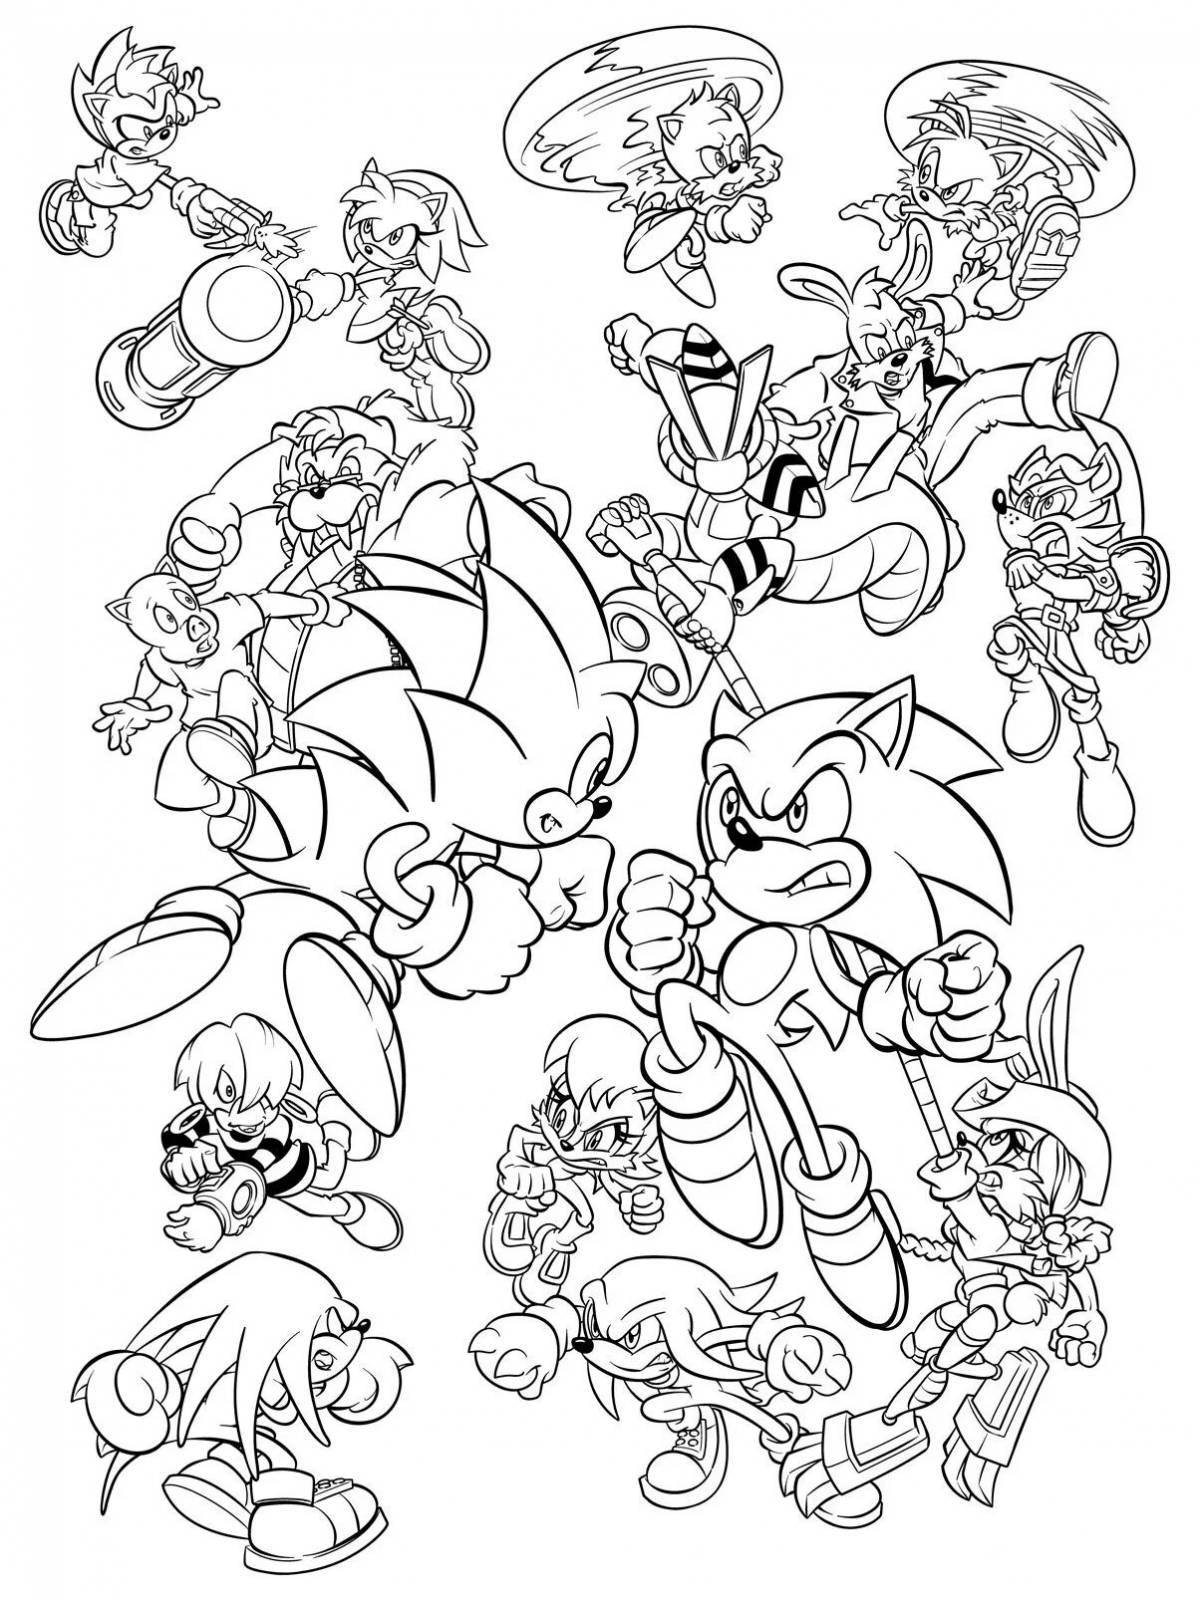 Fairy coloring sonic whole team